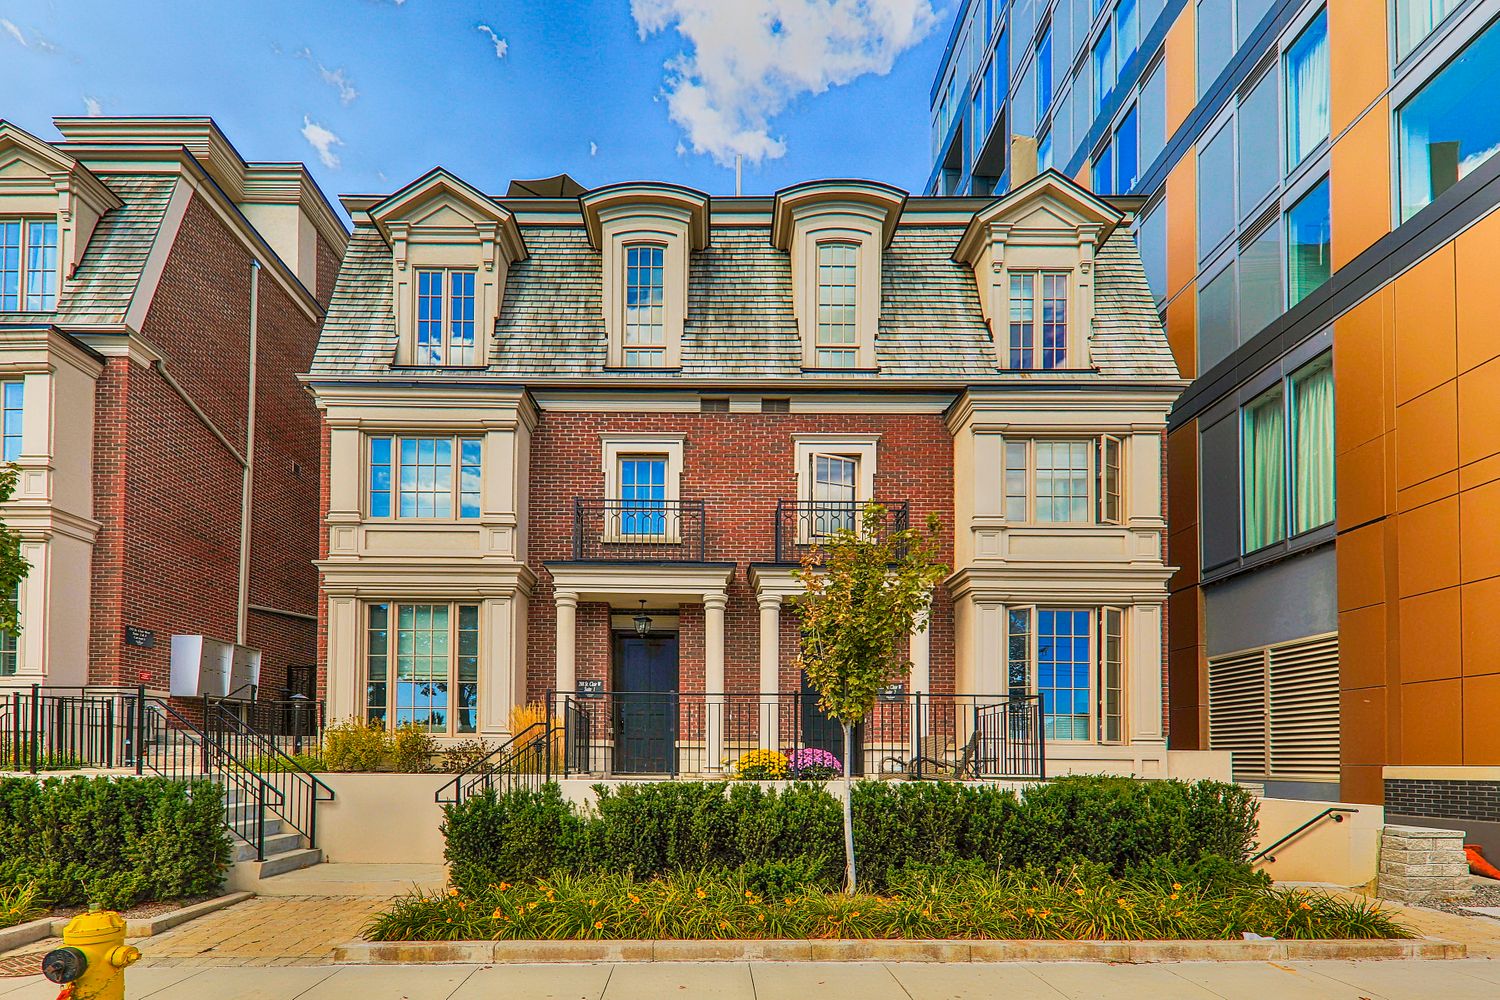 288-292 St Clair Avenue W. Churchill Collection Townhomes is located in  Midtown, Toronto - image #2 of 4